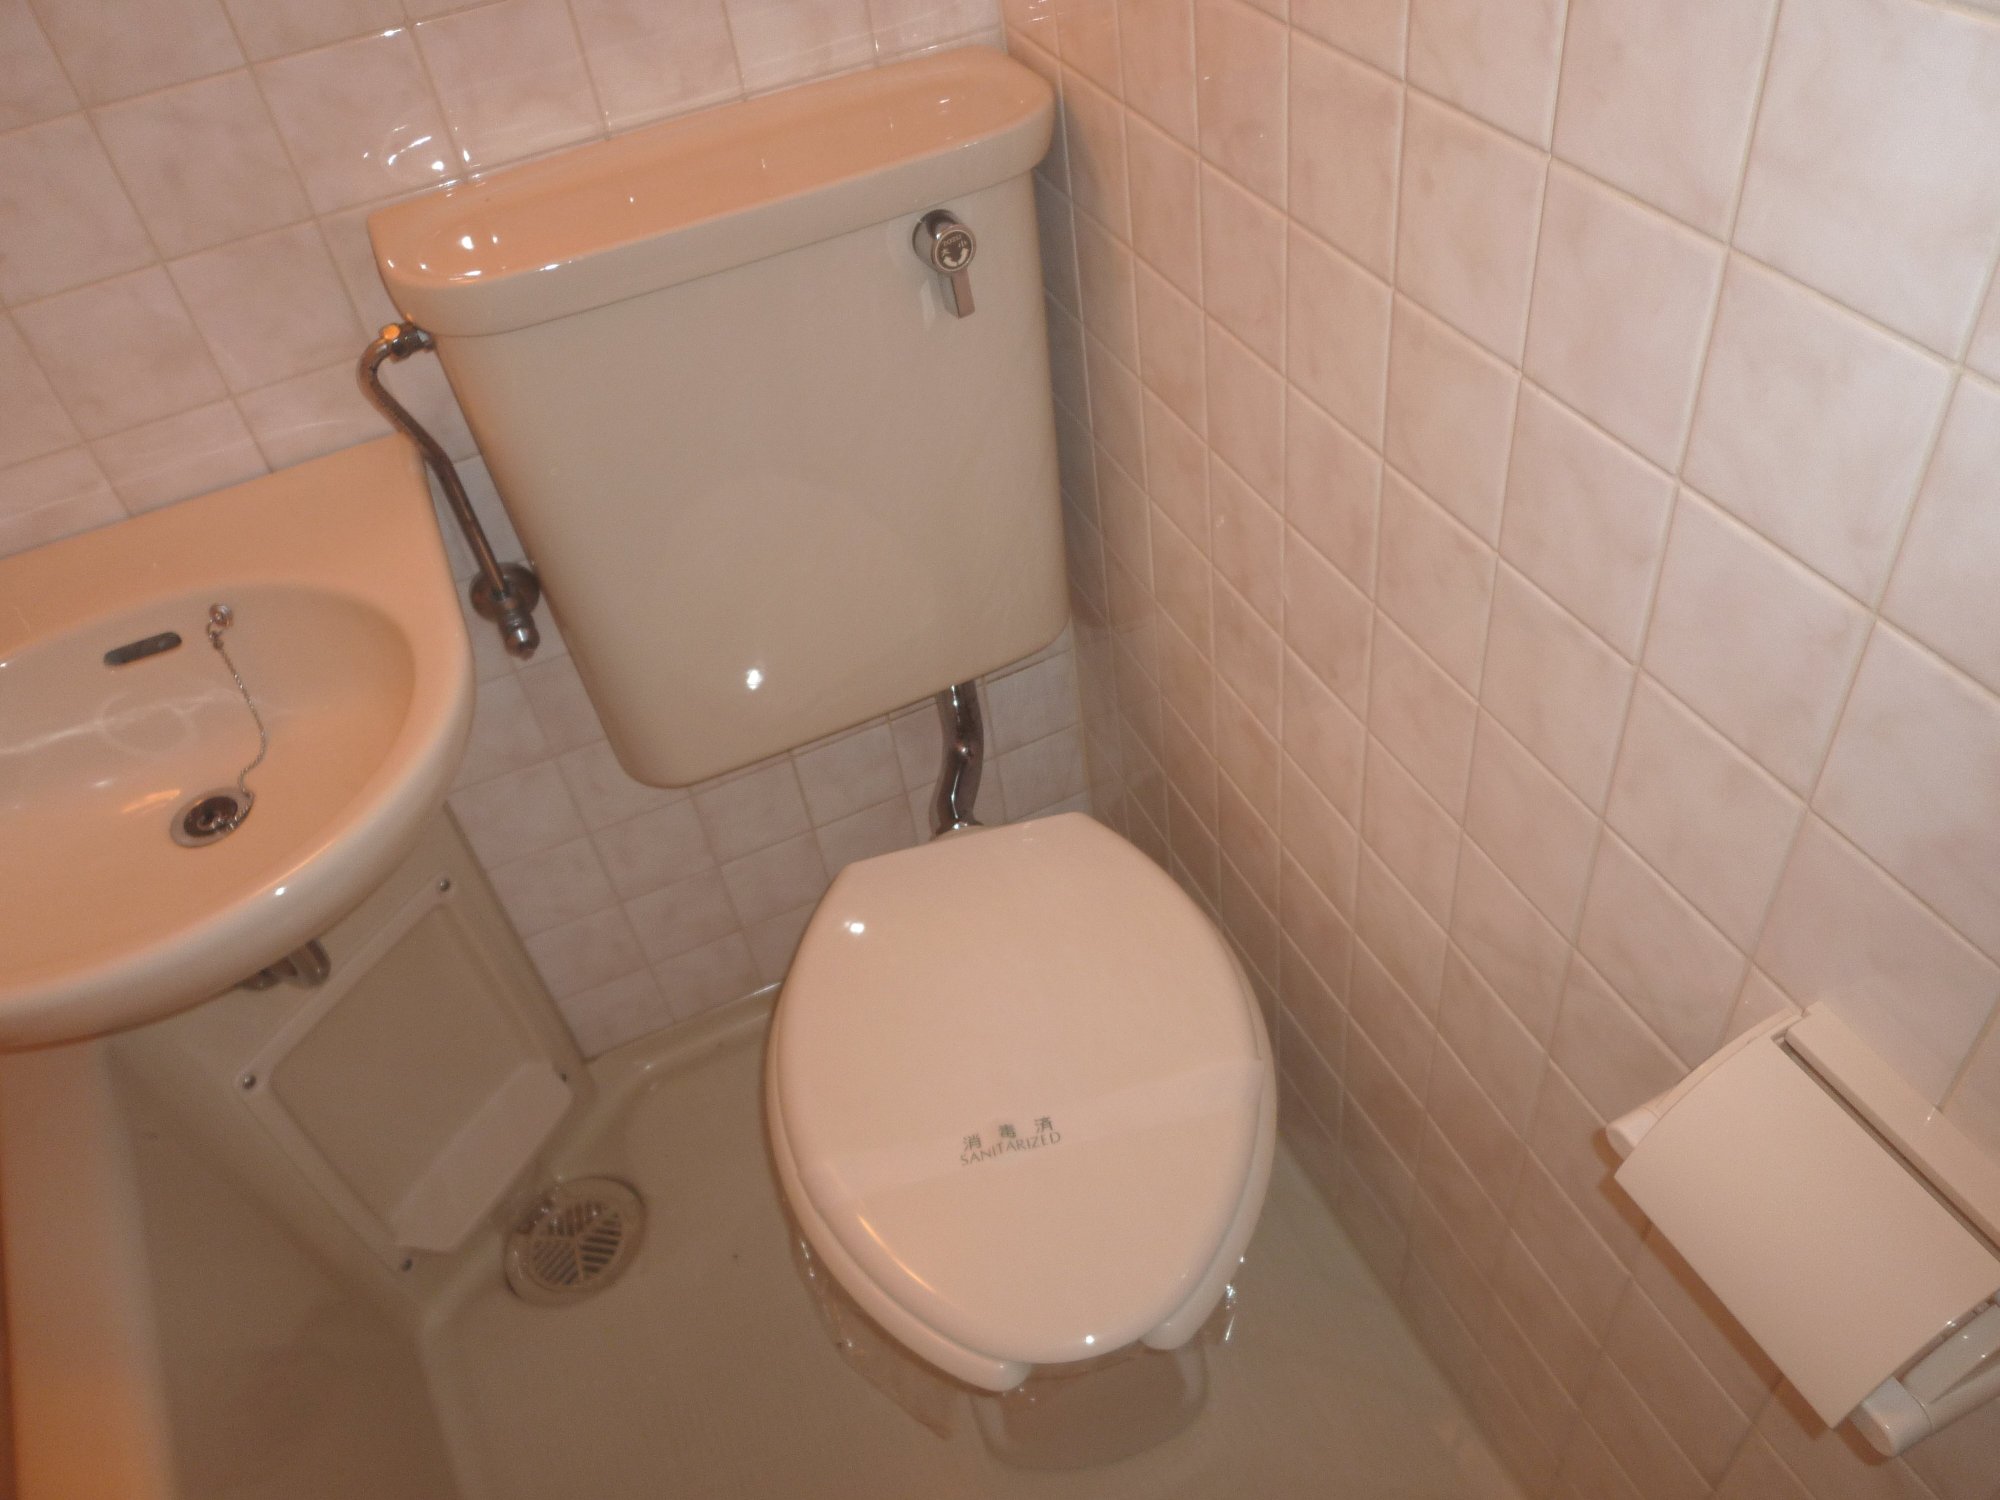 Toilet. Is the type of bath and toilet were together. 